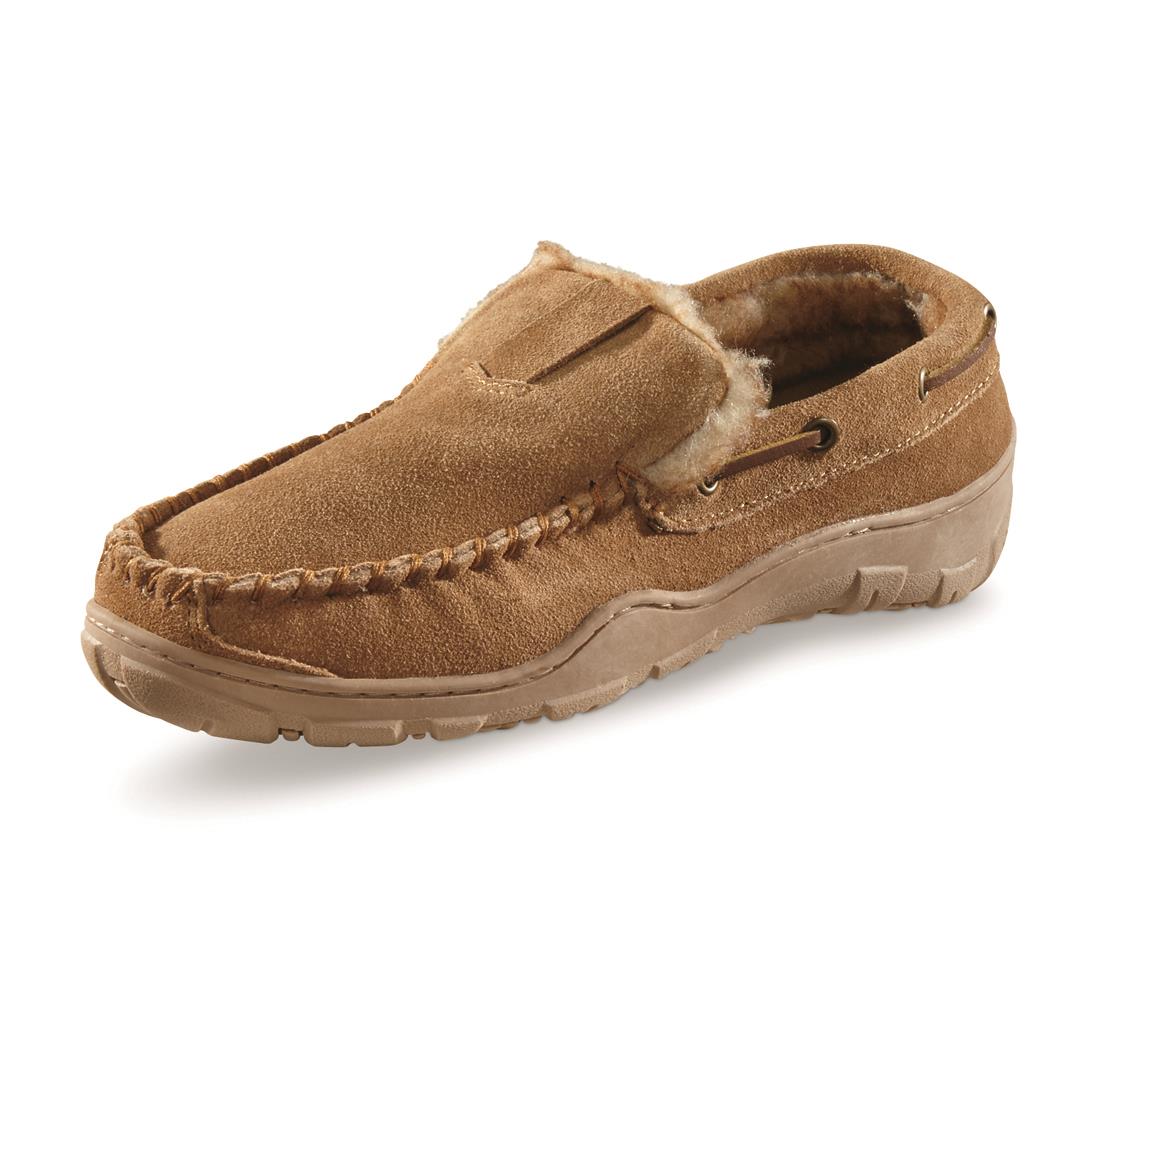 Ariat Men's Lasso Suede Slippers - 723271, Slippers at Sportsman's Guide